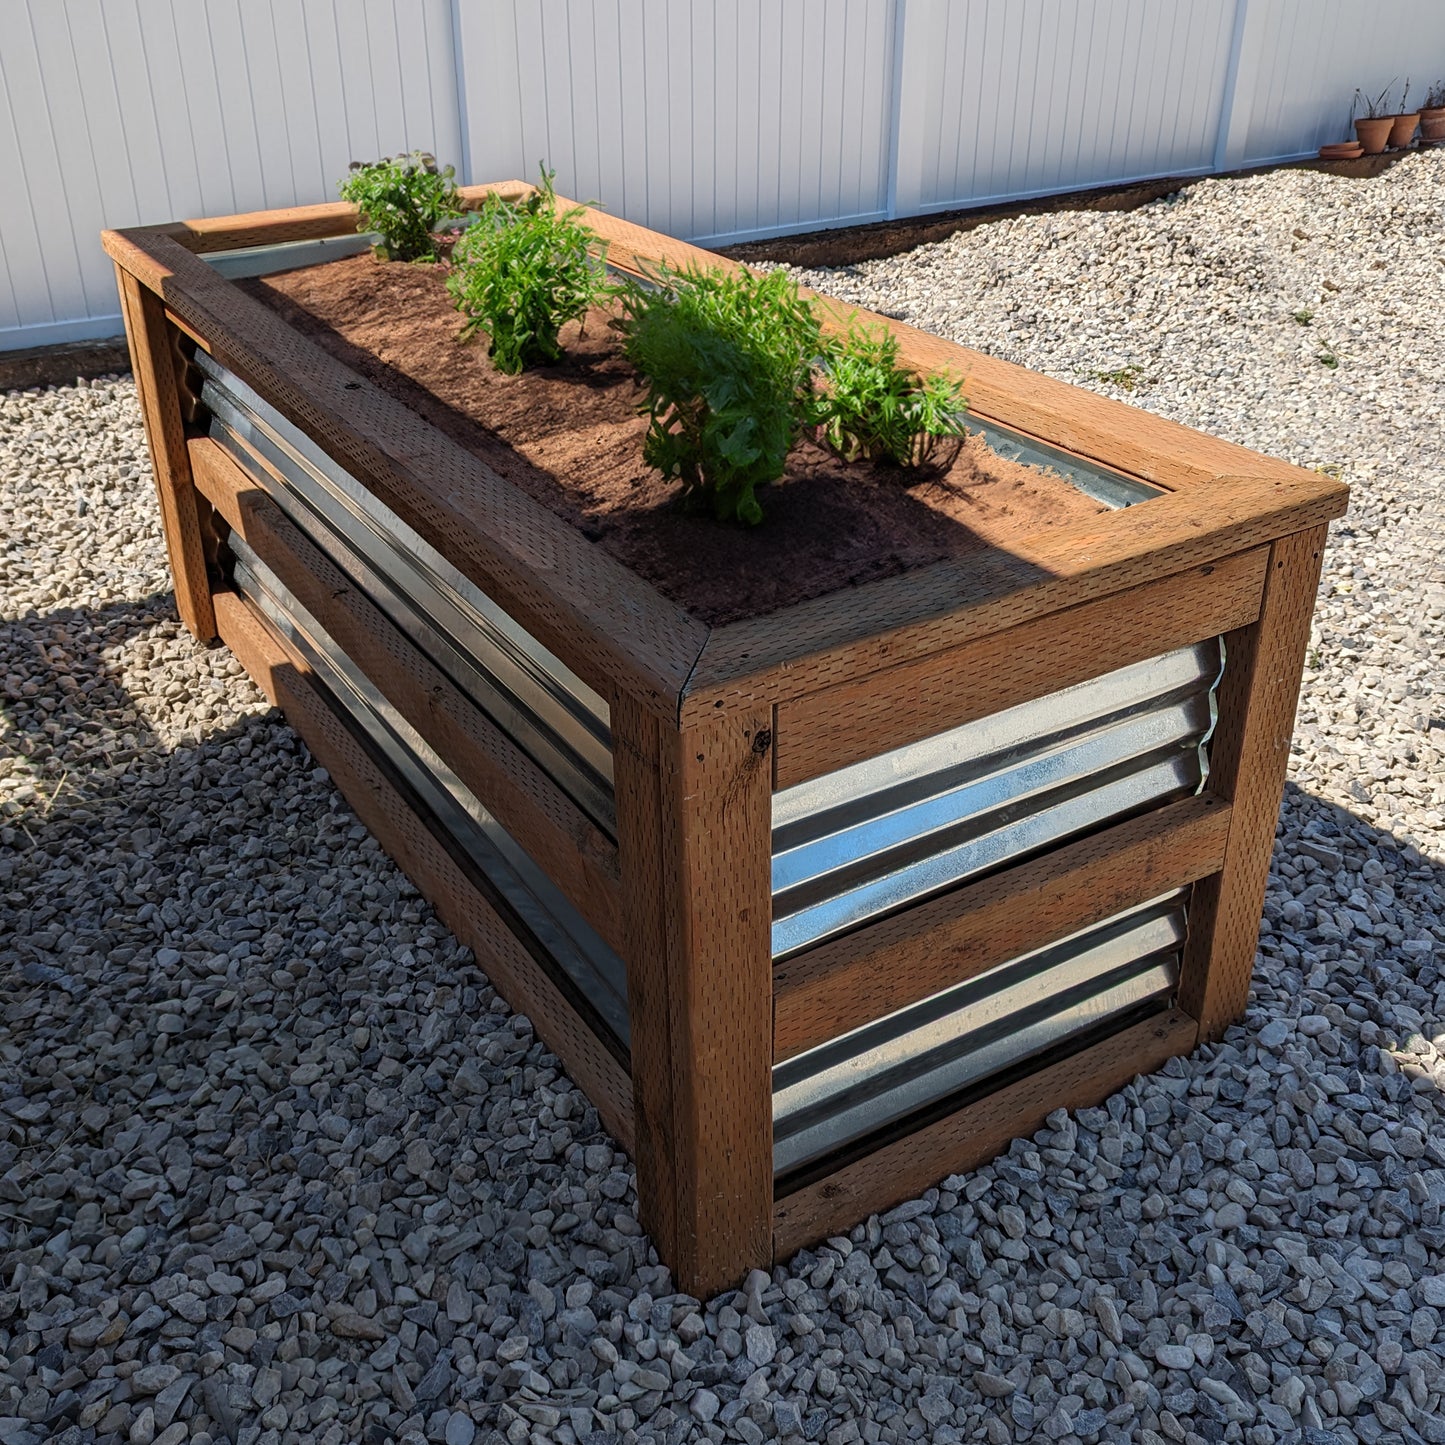 Shed & Dipity "Homeshed" Planter Boxes